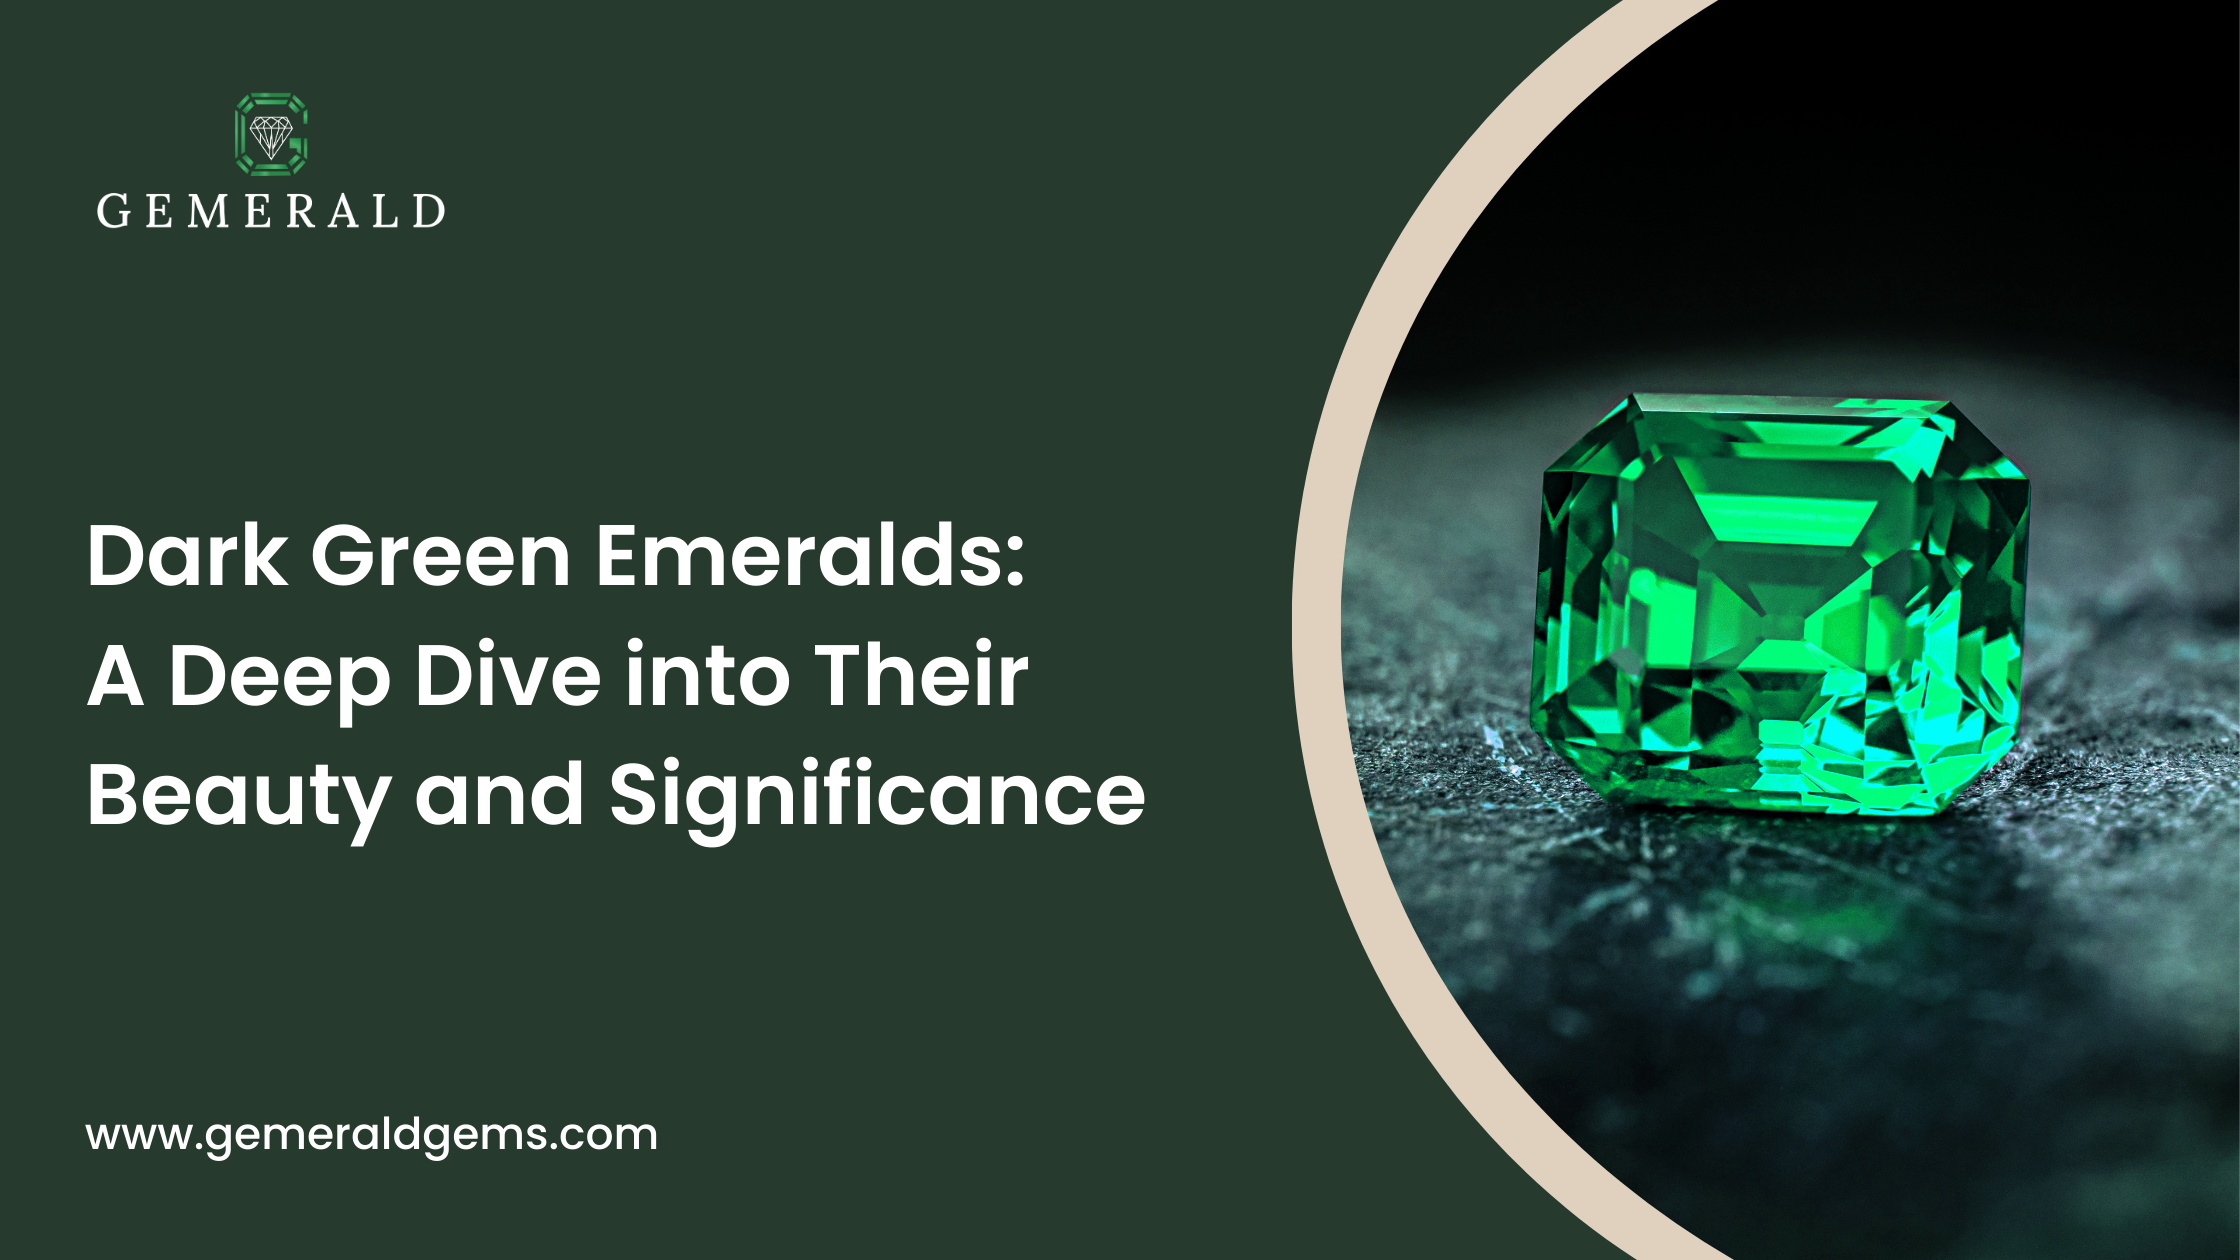 Dark Green Emeralds: A Deep Dive into Their Beauty and Significance